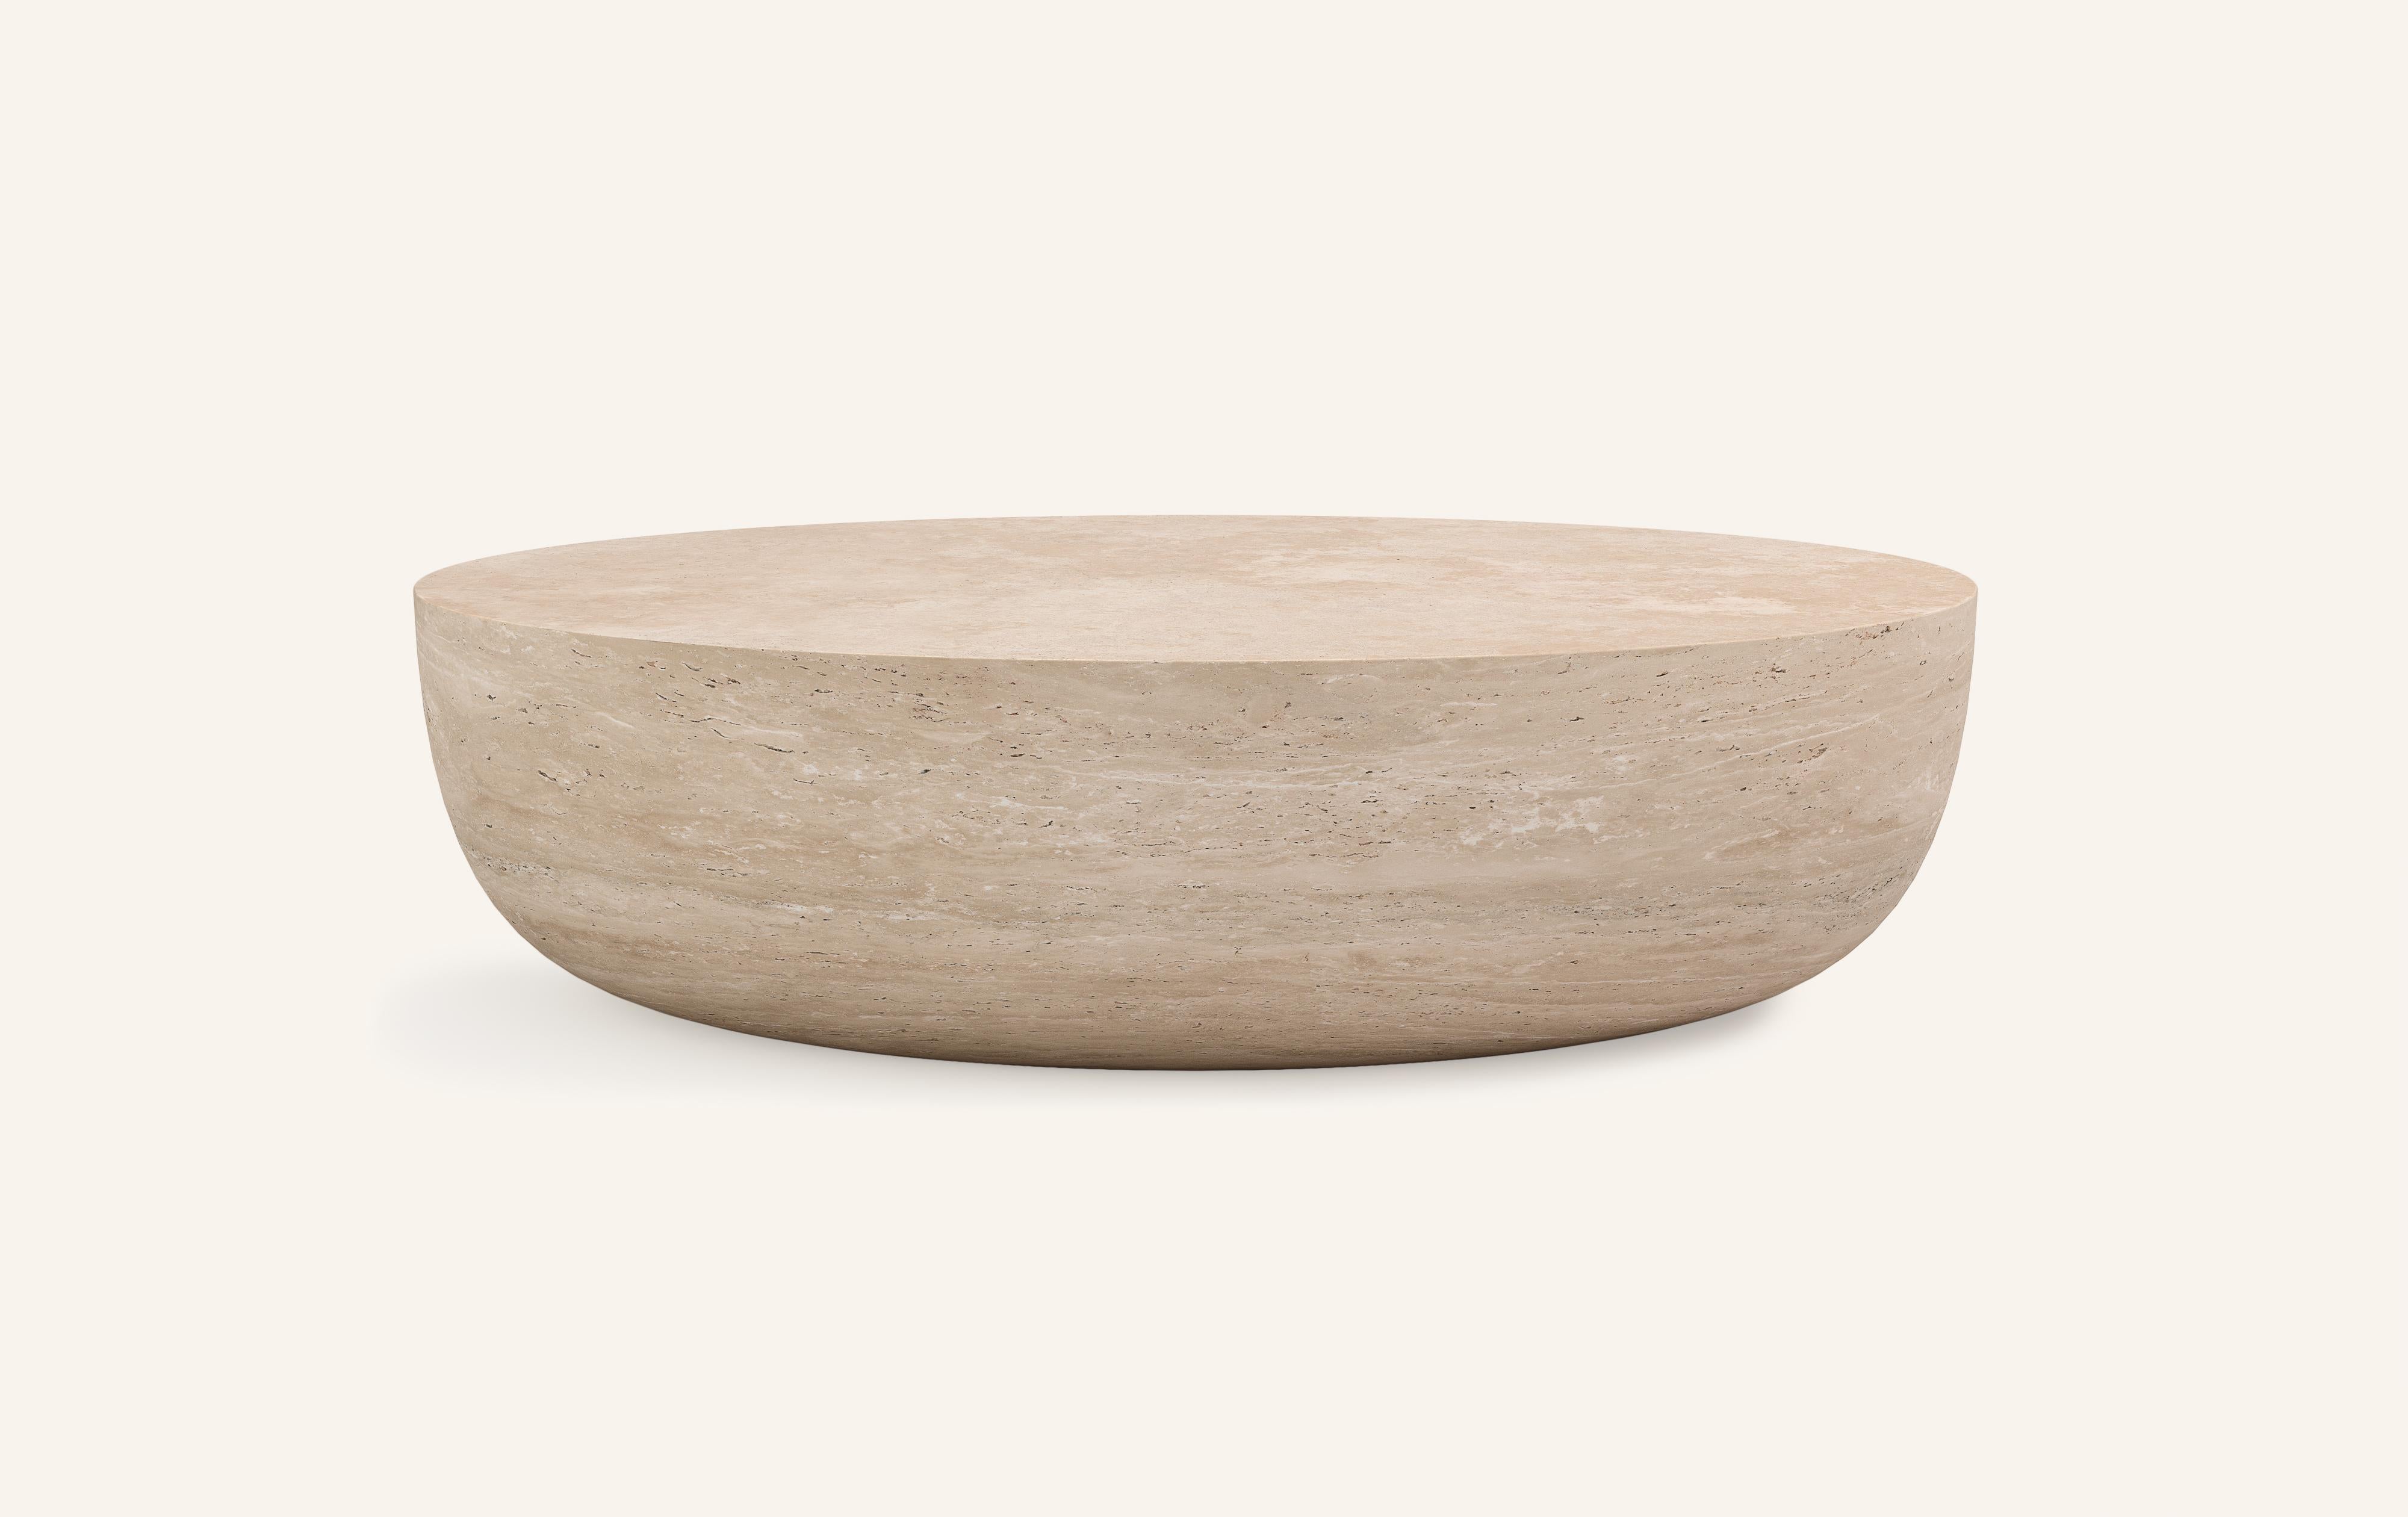 A SLICE OF A ’SPHERE’ OR 'SFERA' IN ITALIAN BALANCES A FLAT SURFACE ATOP AND ROBUST MONOLITH FORM. WITH A BASE SOFTENED BY A CURVED PROFILE, SFERA IS SOFT AND EARTHY IN ITS AVAILABLE STONE SELECTIONS.

DIMENSIONS: 
48”L x 36”W x 16”H: 
- SOLID BLOCK